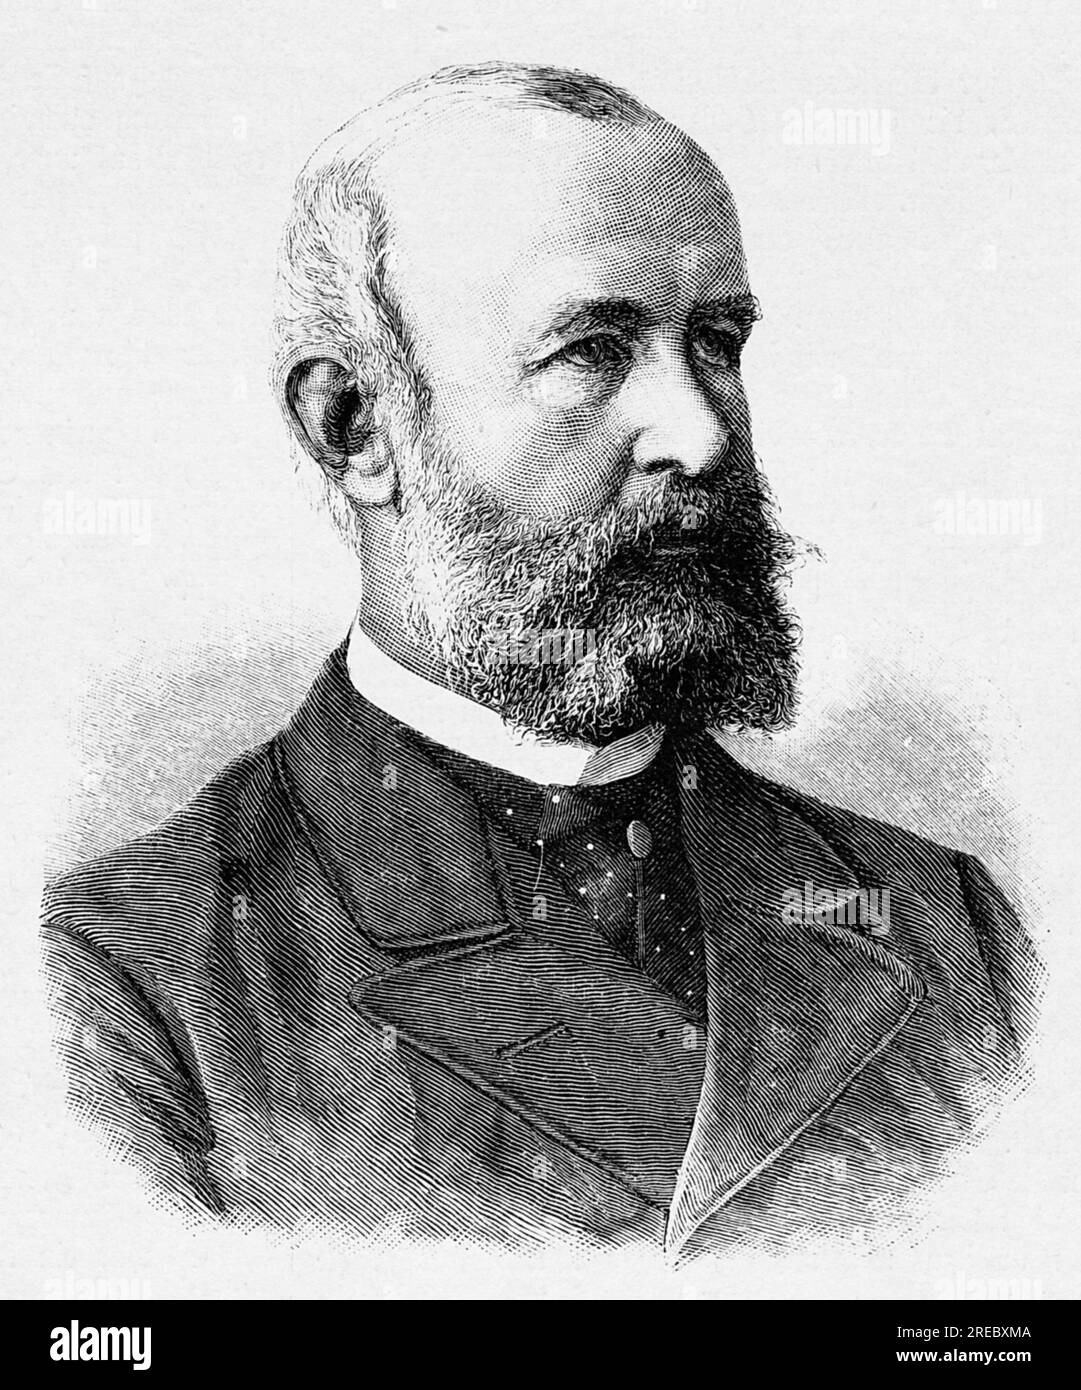 Wedel-Piesdorf, Wilhelm von, 20.5.1834 - 11.7.1915, German landowner and politician (Cons.), ADDITIONAL-RIGHTS-CLEARANCE-INFO-NOT-AVAILABLE Stock Photo